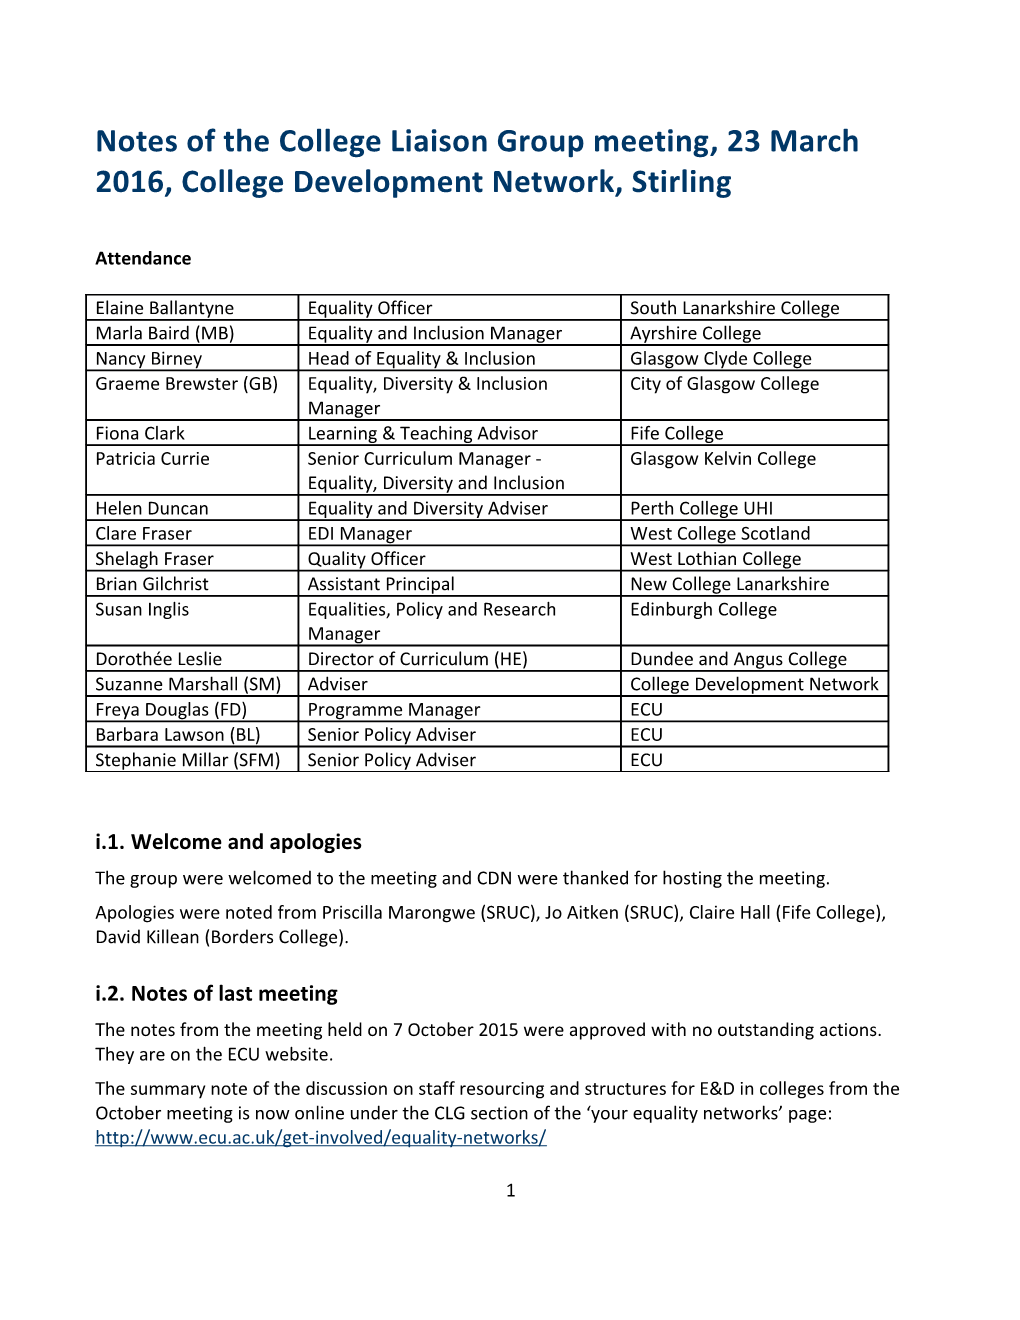 Notes of the College Liaison Group Meeting, 23 March 2016, College Development Network